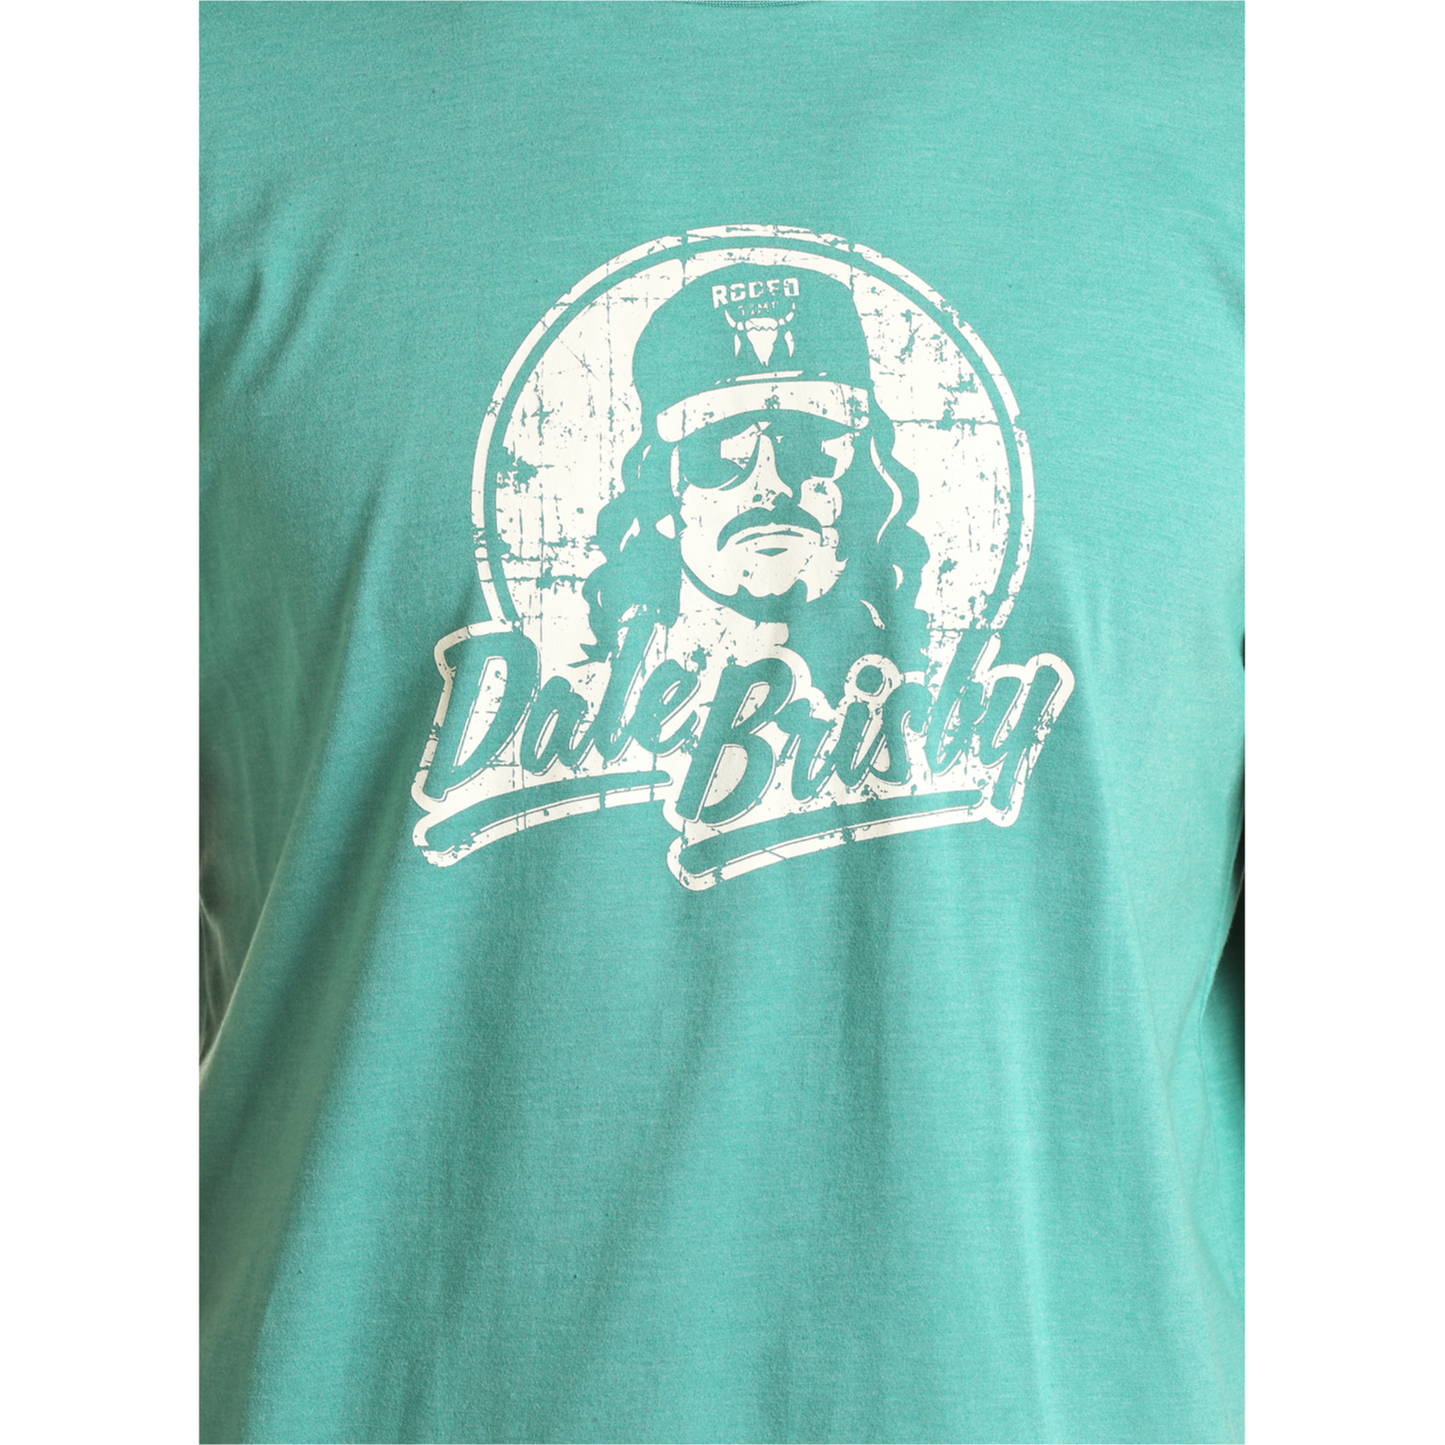 Rock & Roll® Unisex Dale Brisby Graphic Turquoise T-Shirt RRUT21R06G-86